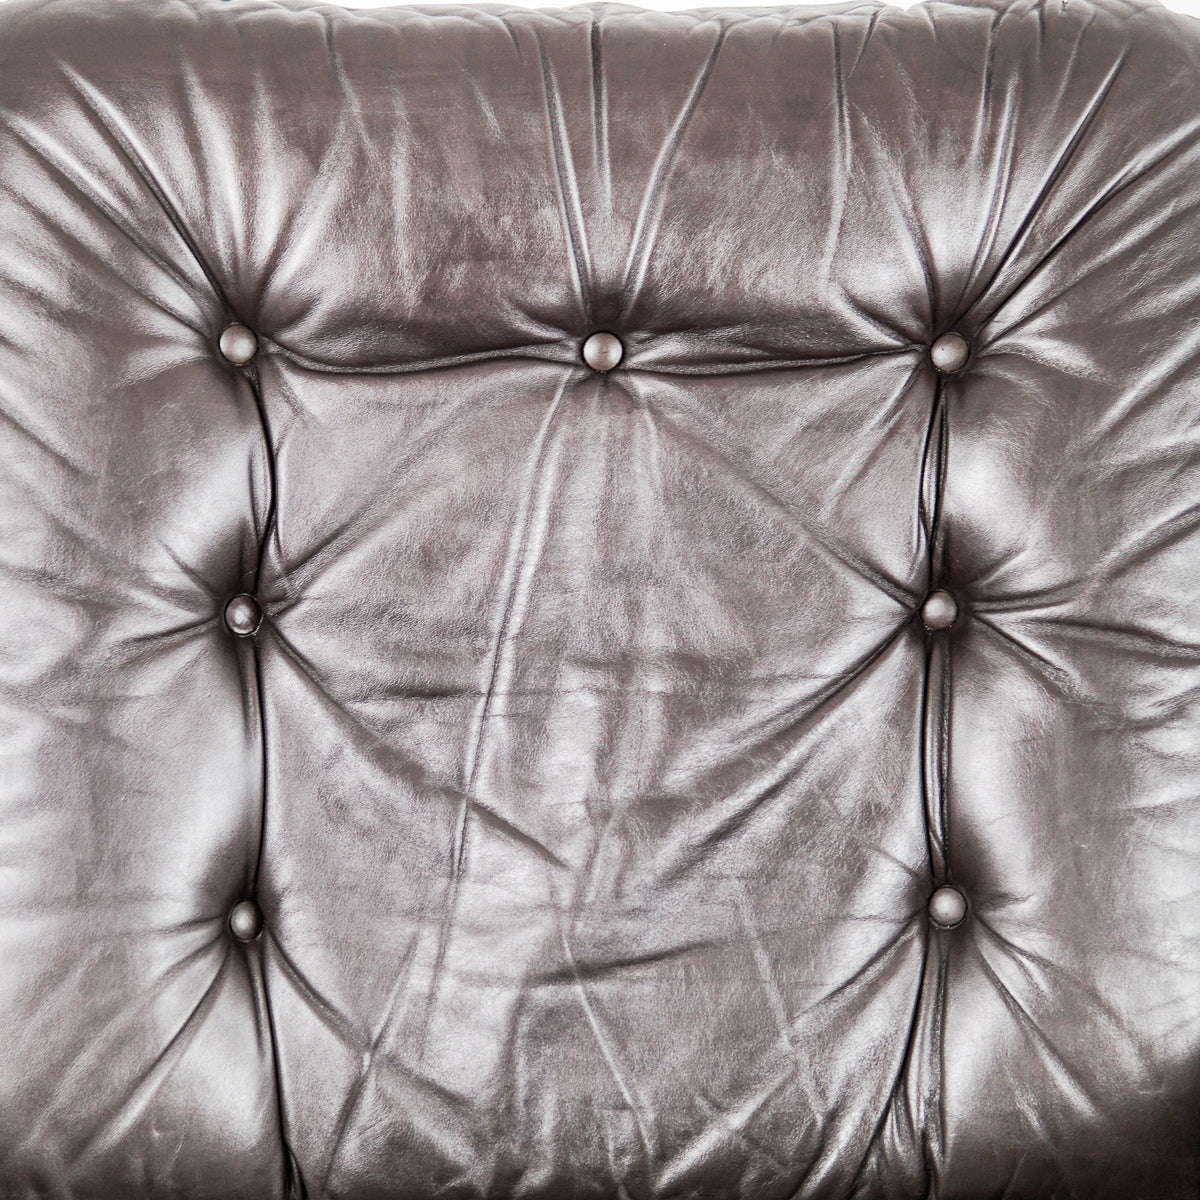 Brown Leather Swivel Chair | Denmark |1960s